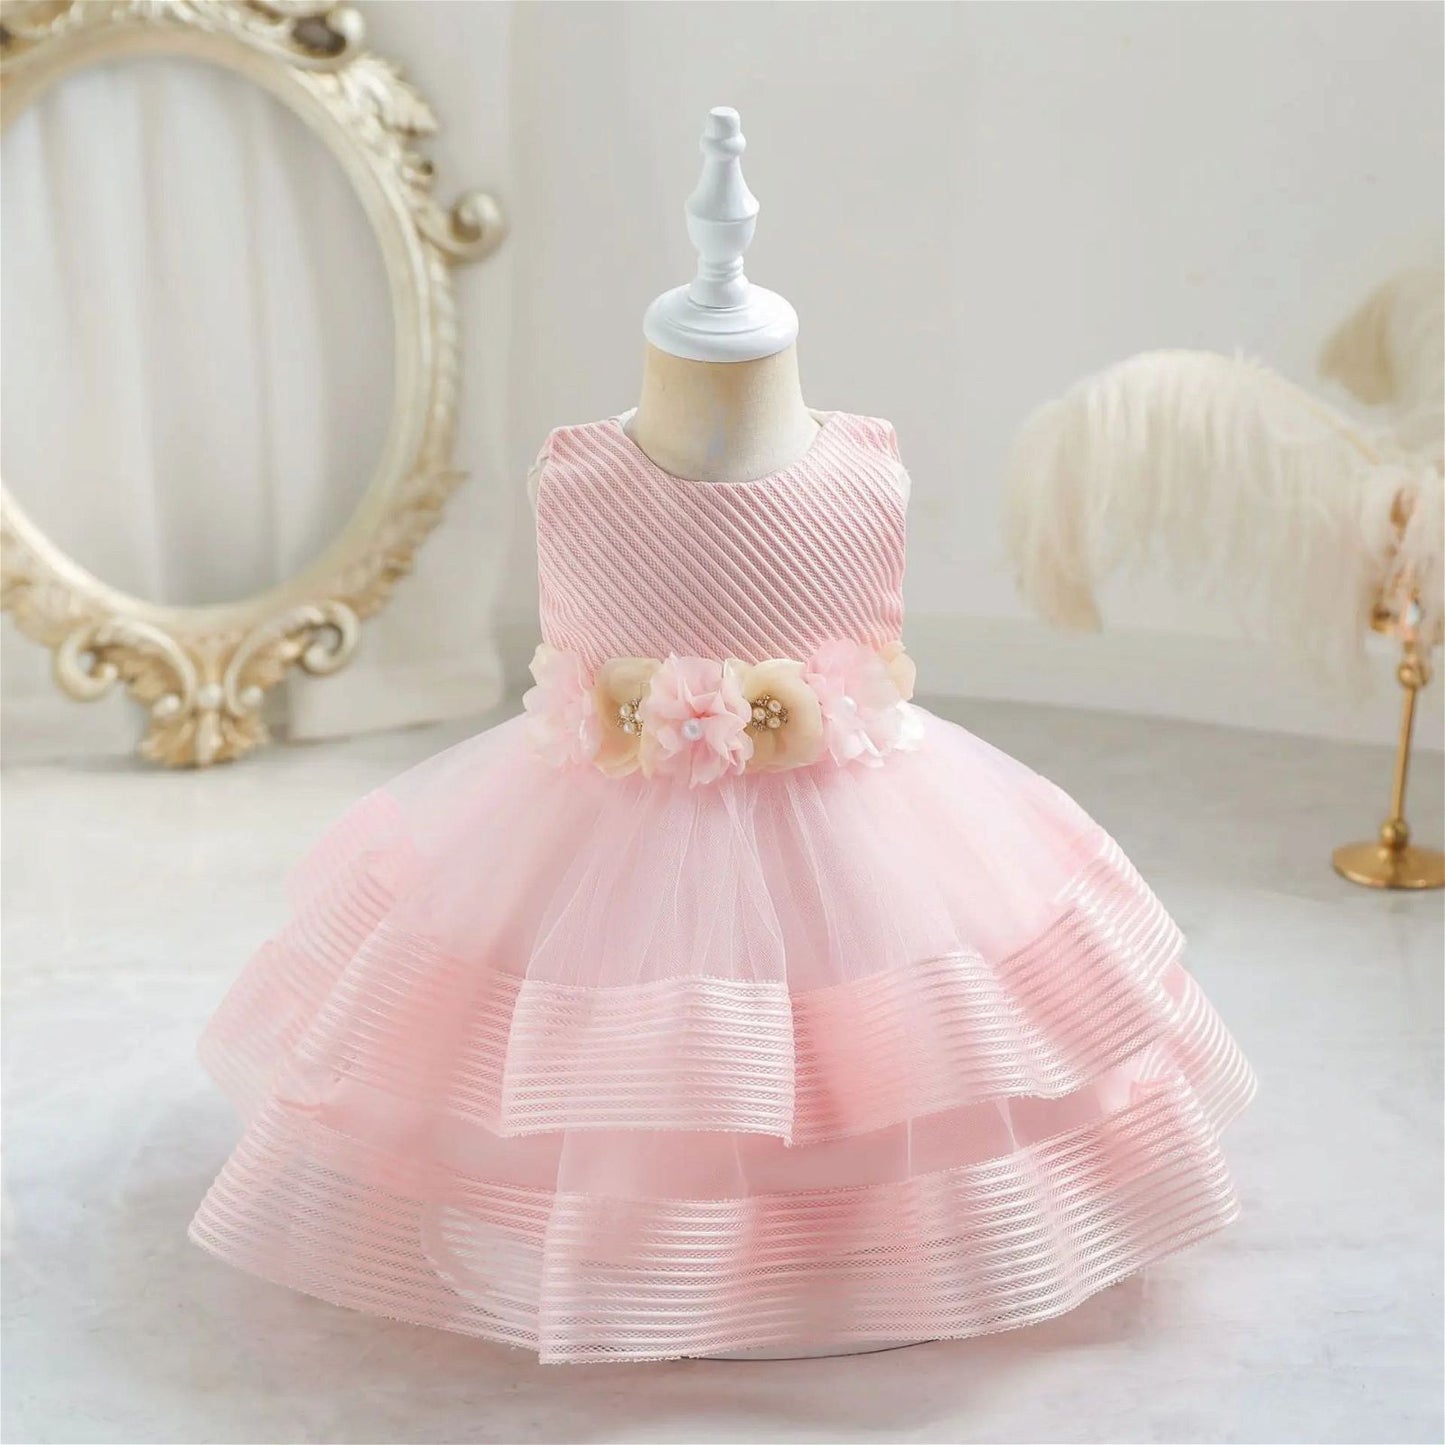 Princess Girl Kid's Dress Flower Bowknot Mesh Layered Baby Party Dresses Striped White Sleeveless Toddler Frocks 0 To 24 Months - ARCHE